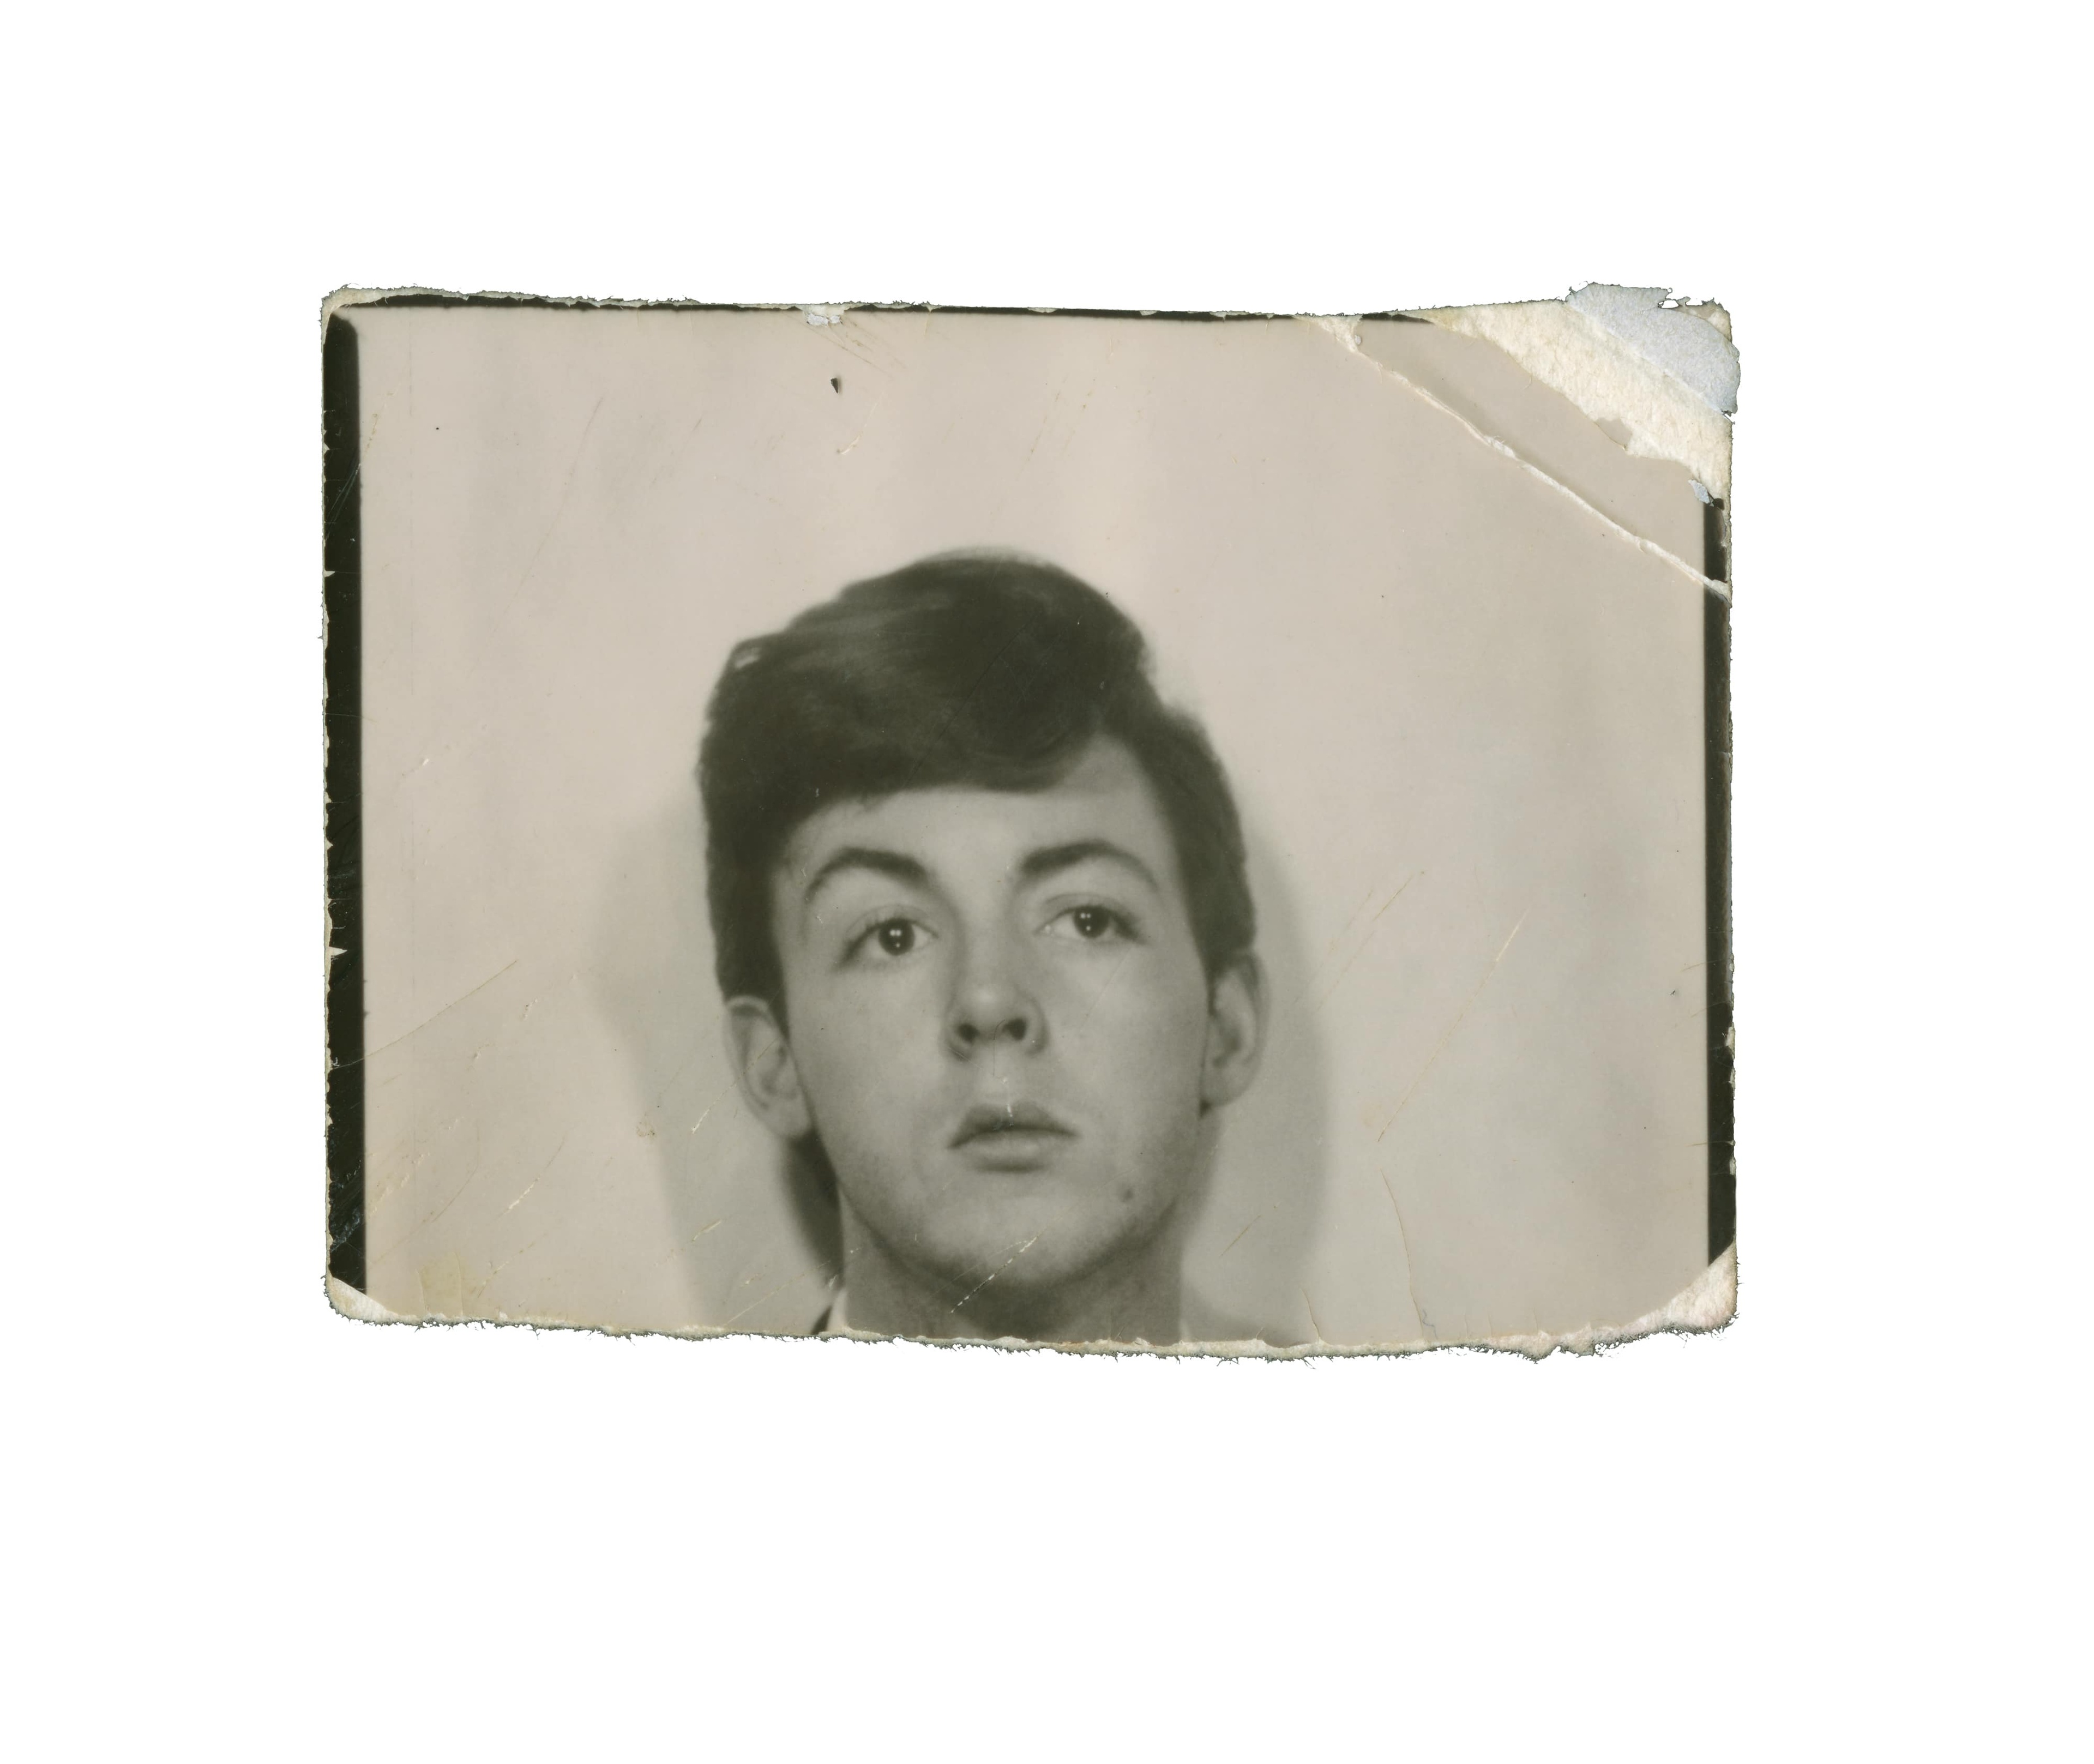 Photo of a young Paul McCartney on torn passport style paper